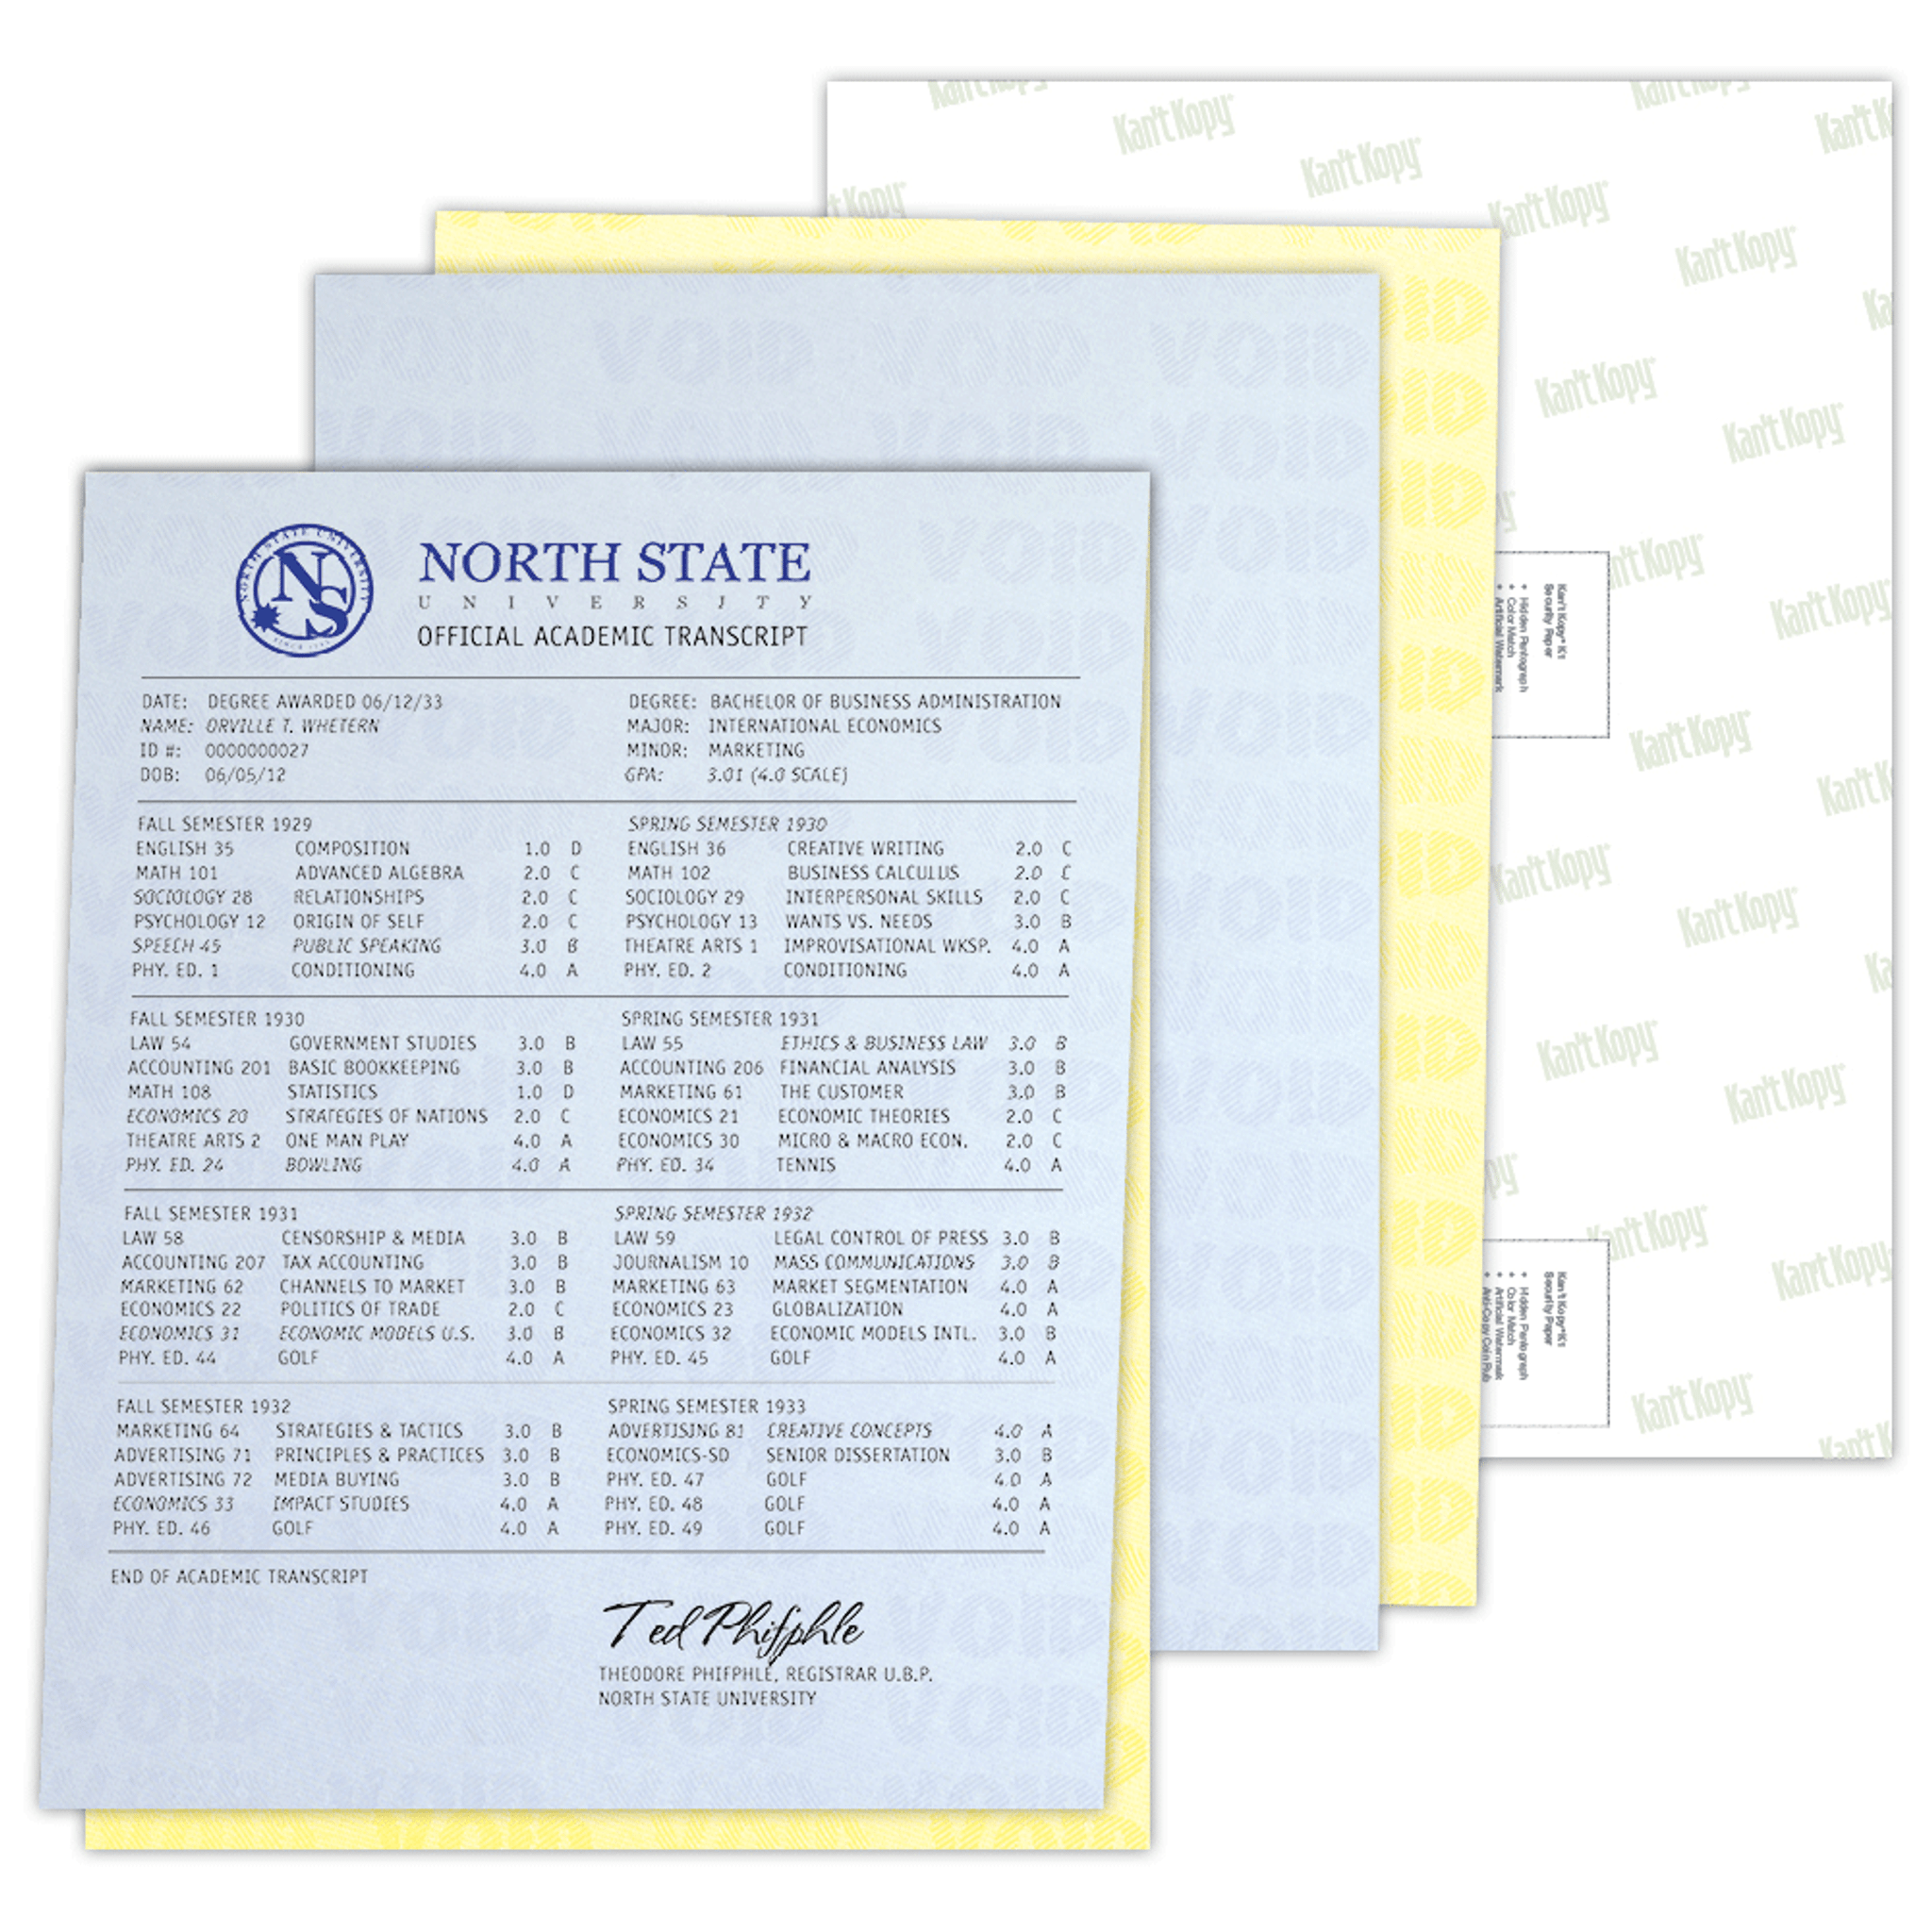 Carbonless Paper, Security Paper and Die-cut Stock for Printers